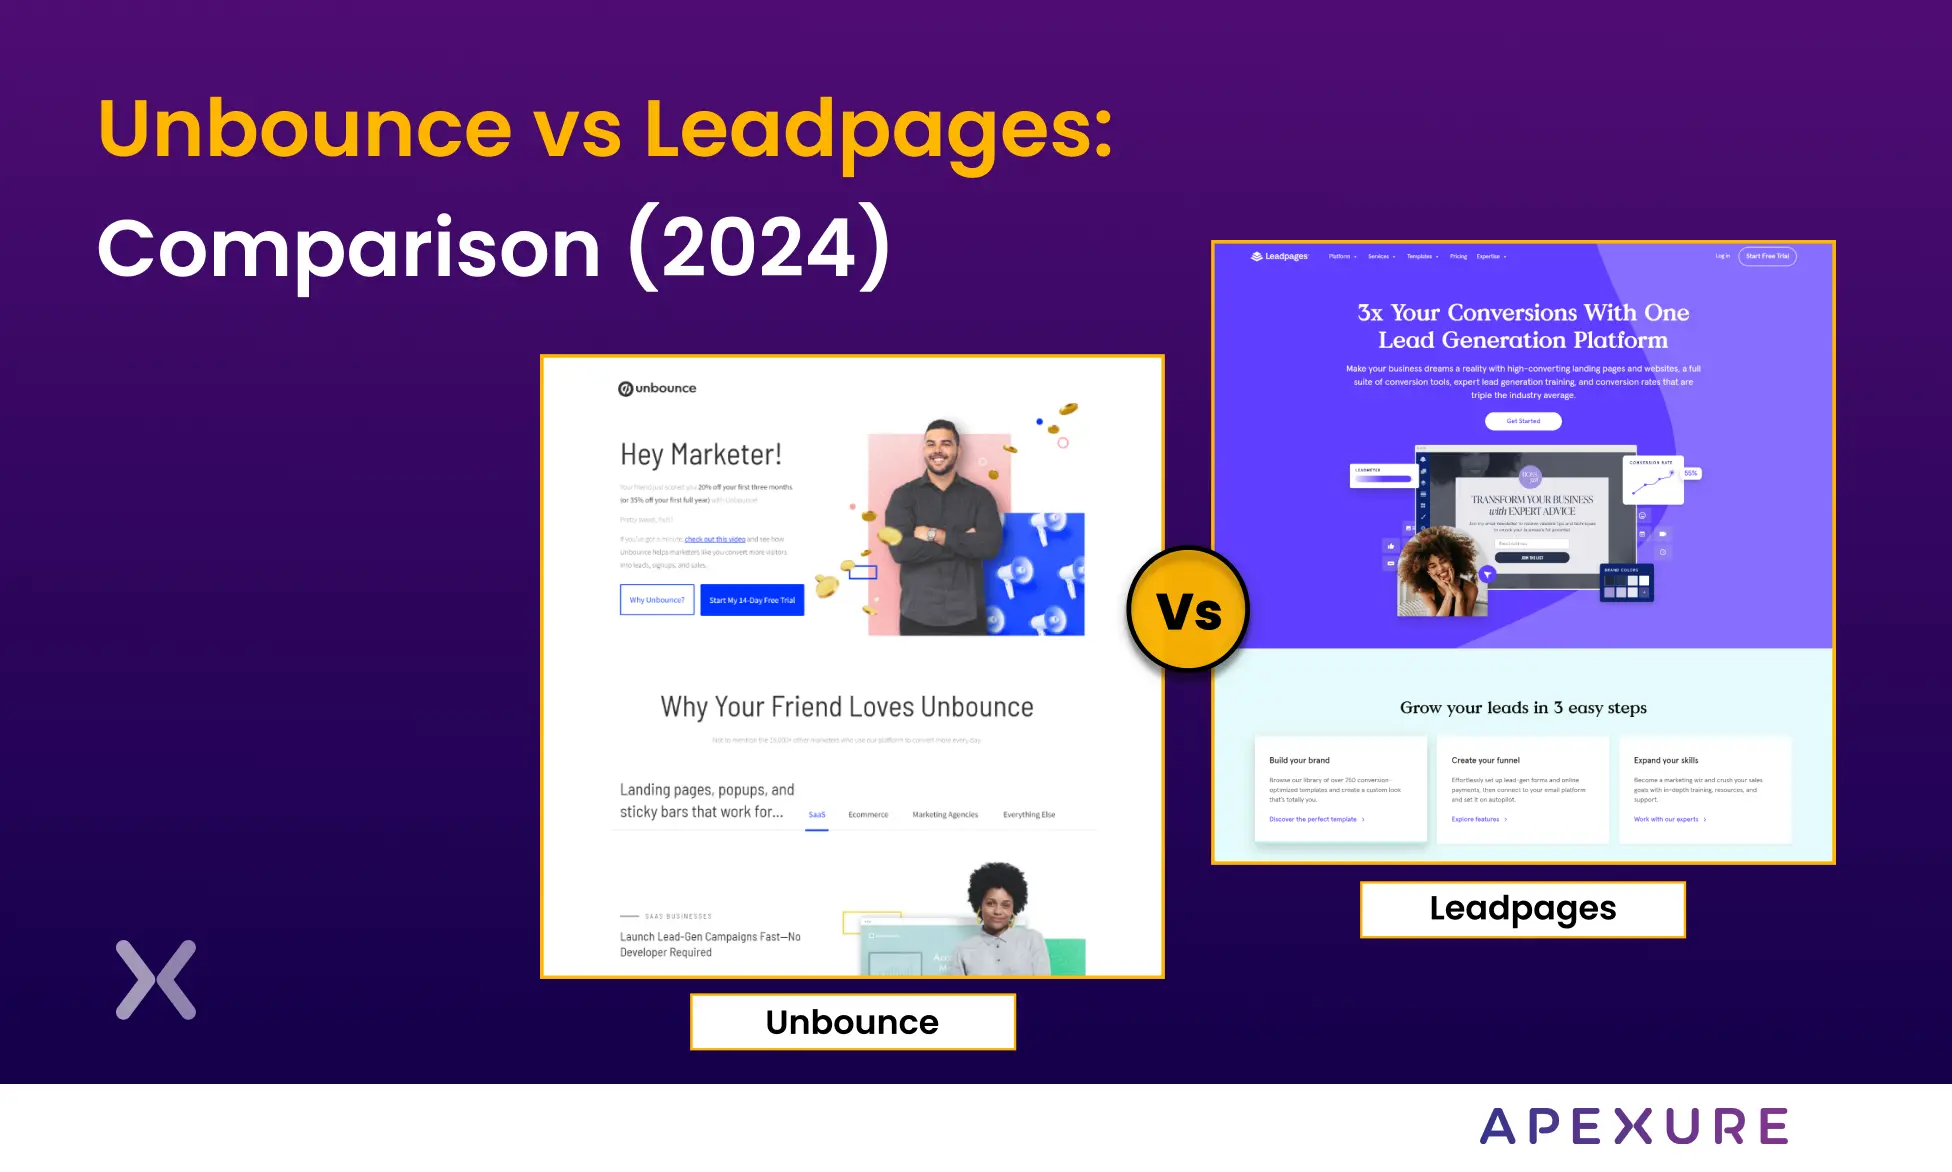 Unbounce vs Leadpages: Which is Better in 2024?